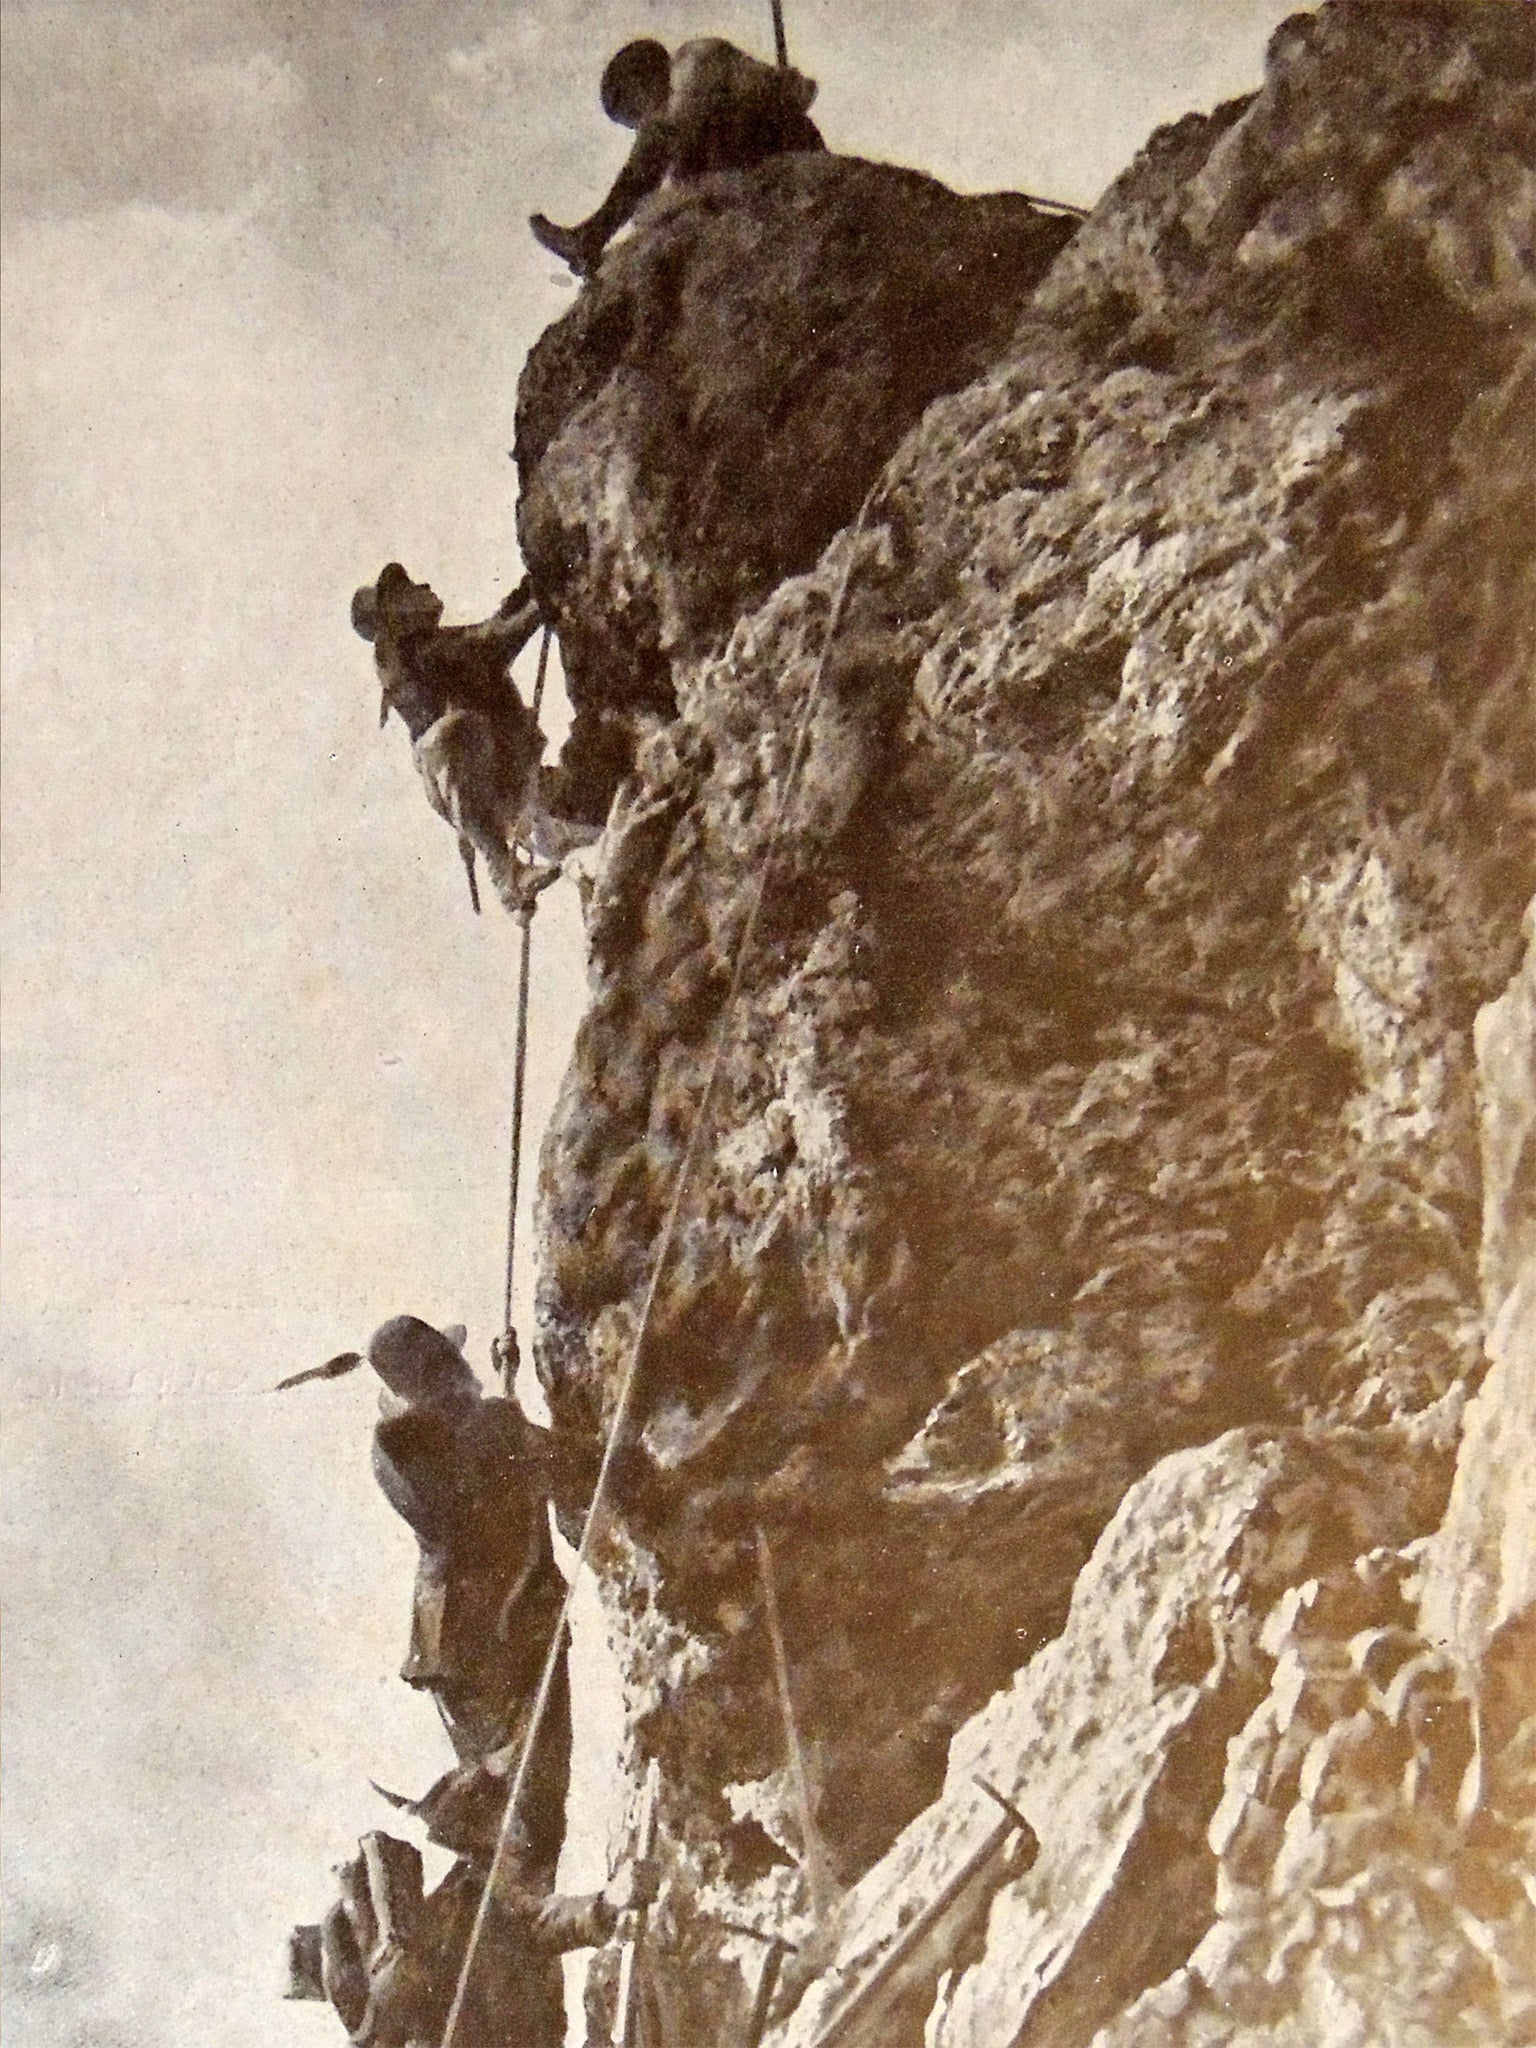 Italian light infantry of the 1st Alpini Regiment on Monte Nero, during the Isonzo campaigns